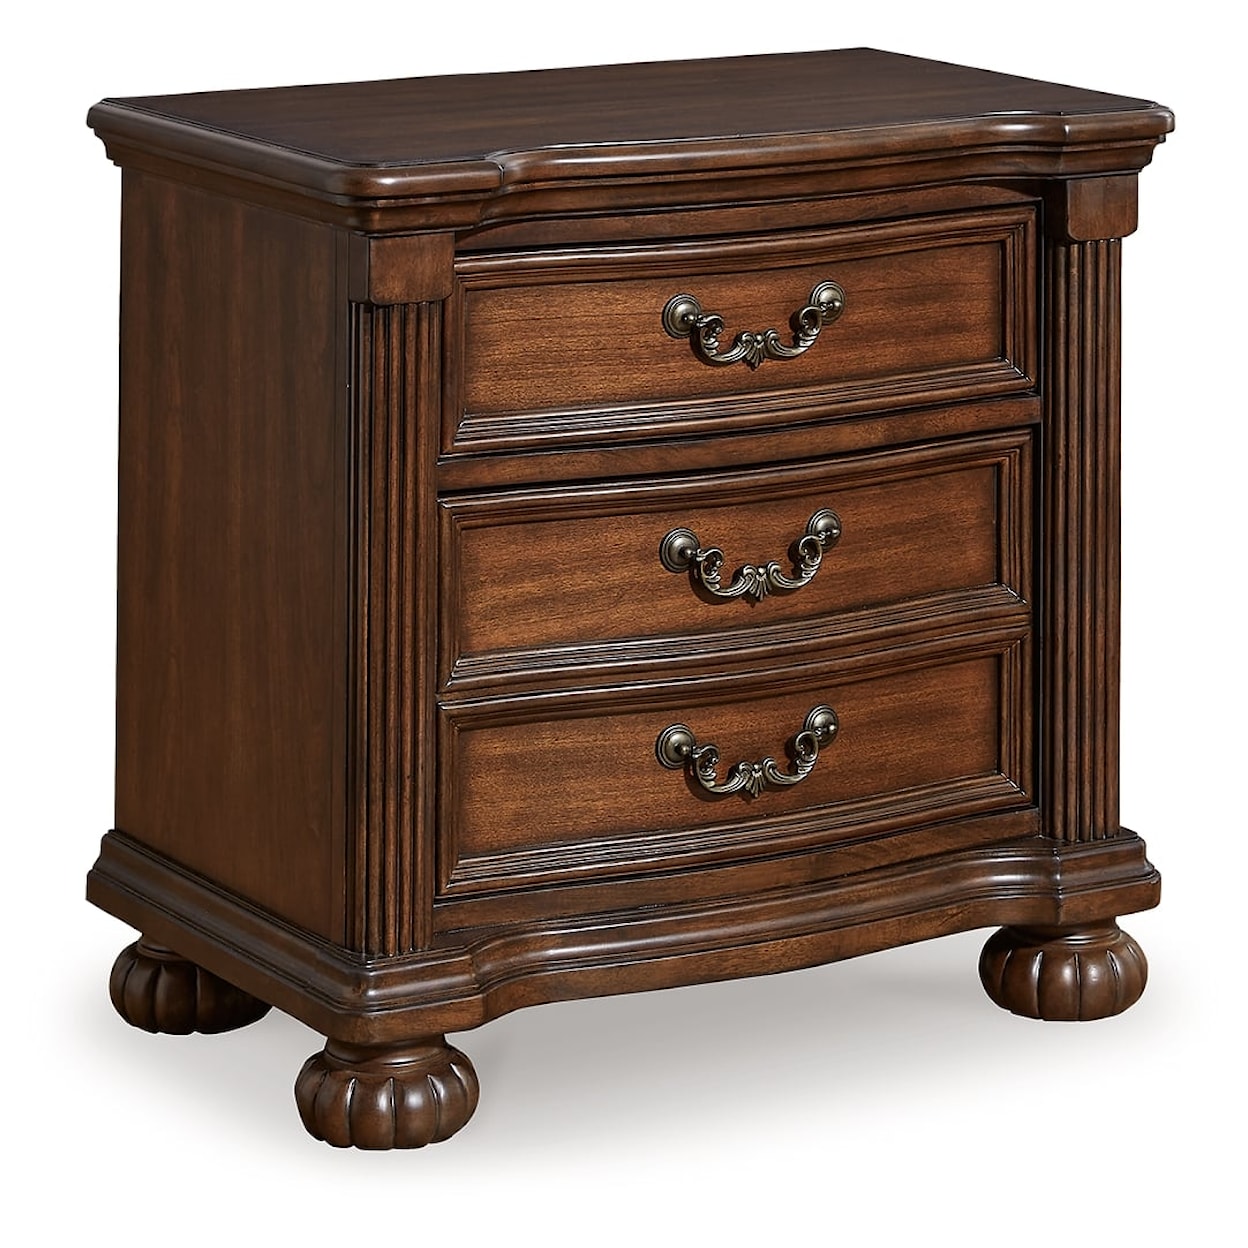 Signature Design by Ashley Lavinton 3-Drawer Nightstand